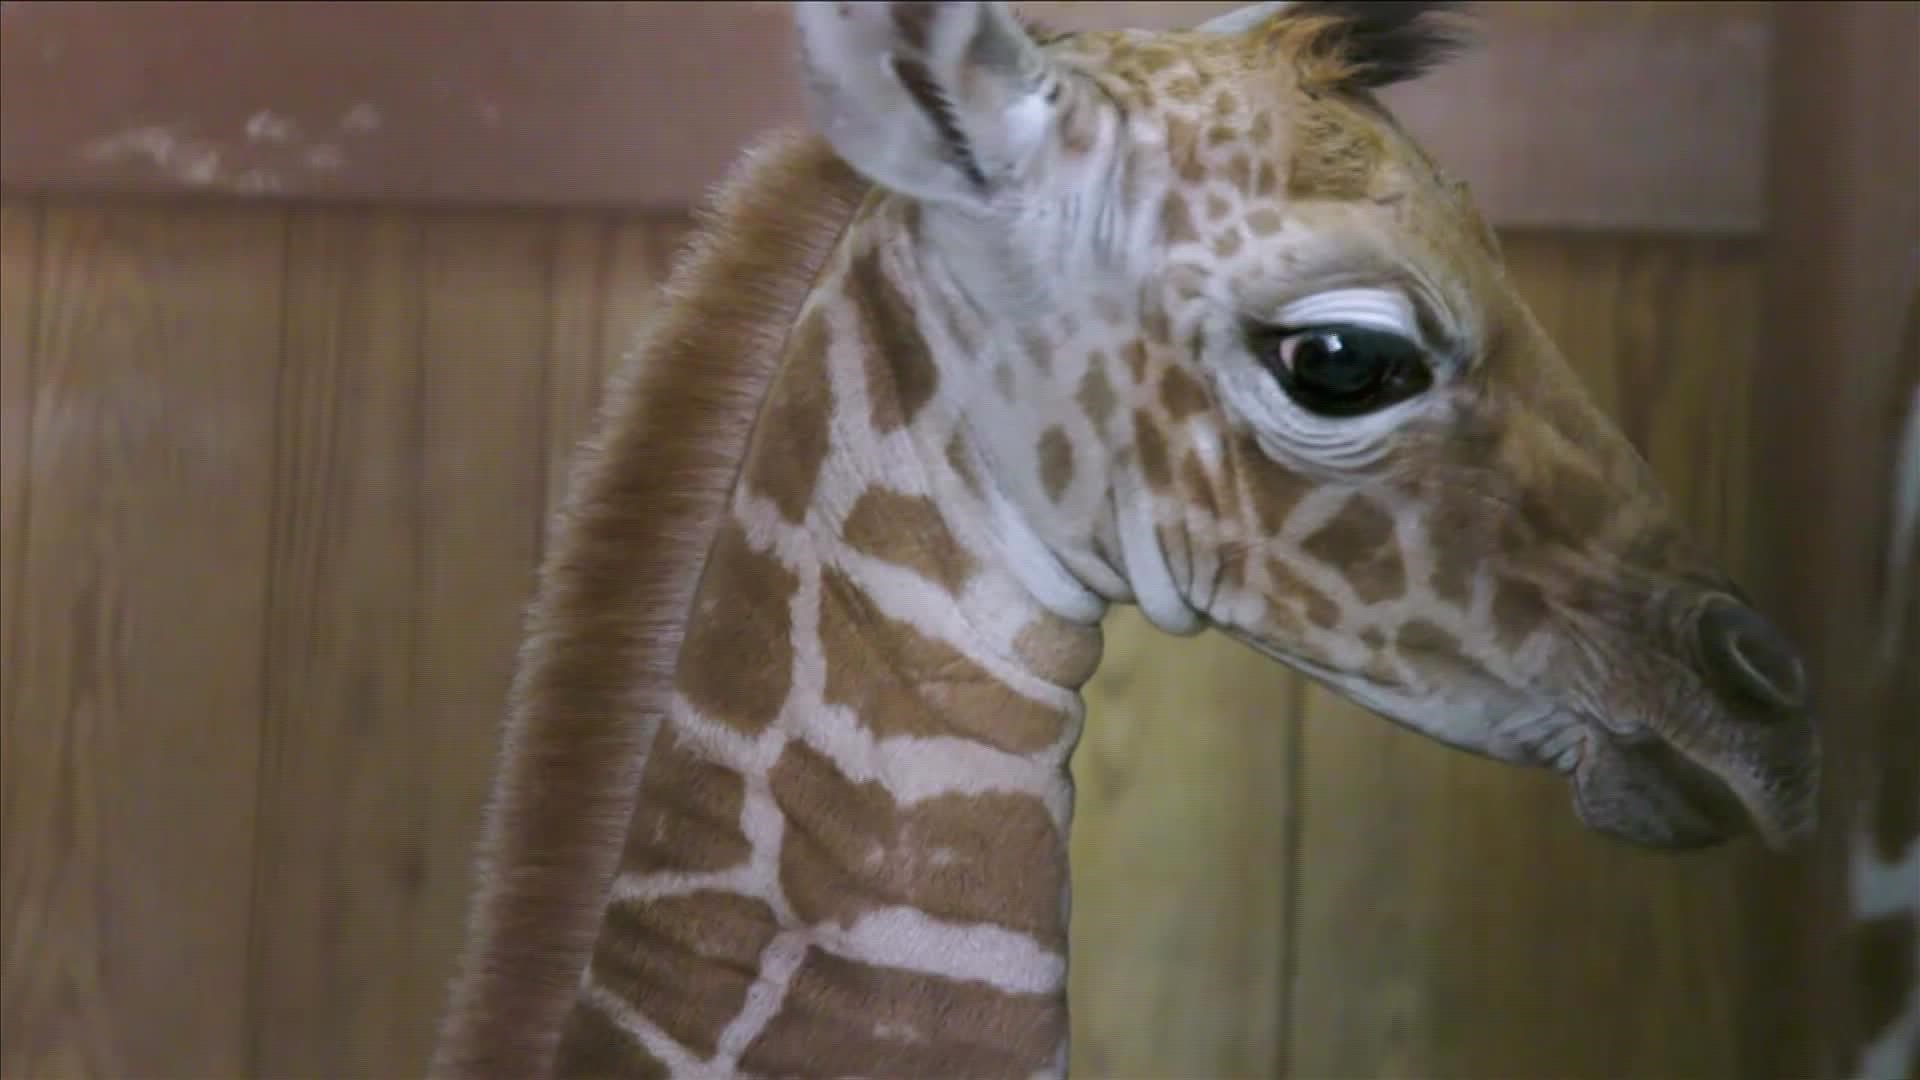 The Memphis Zoo's star giraffe was transferred to a zoo in Utah as part of the giraffe's Species Protection Plan.